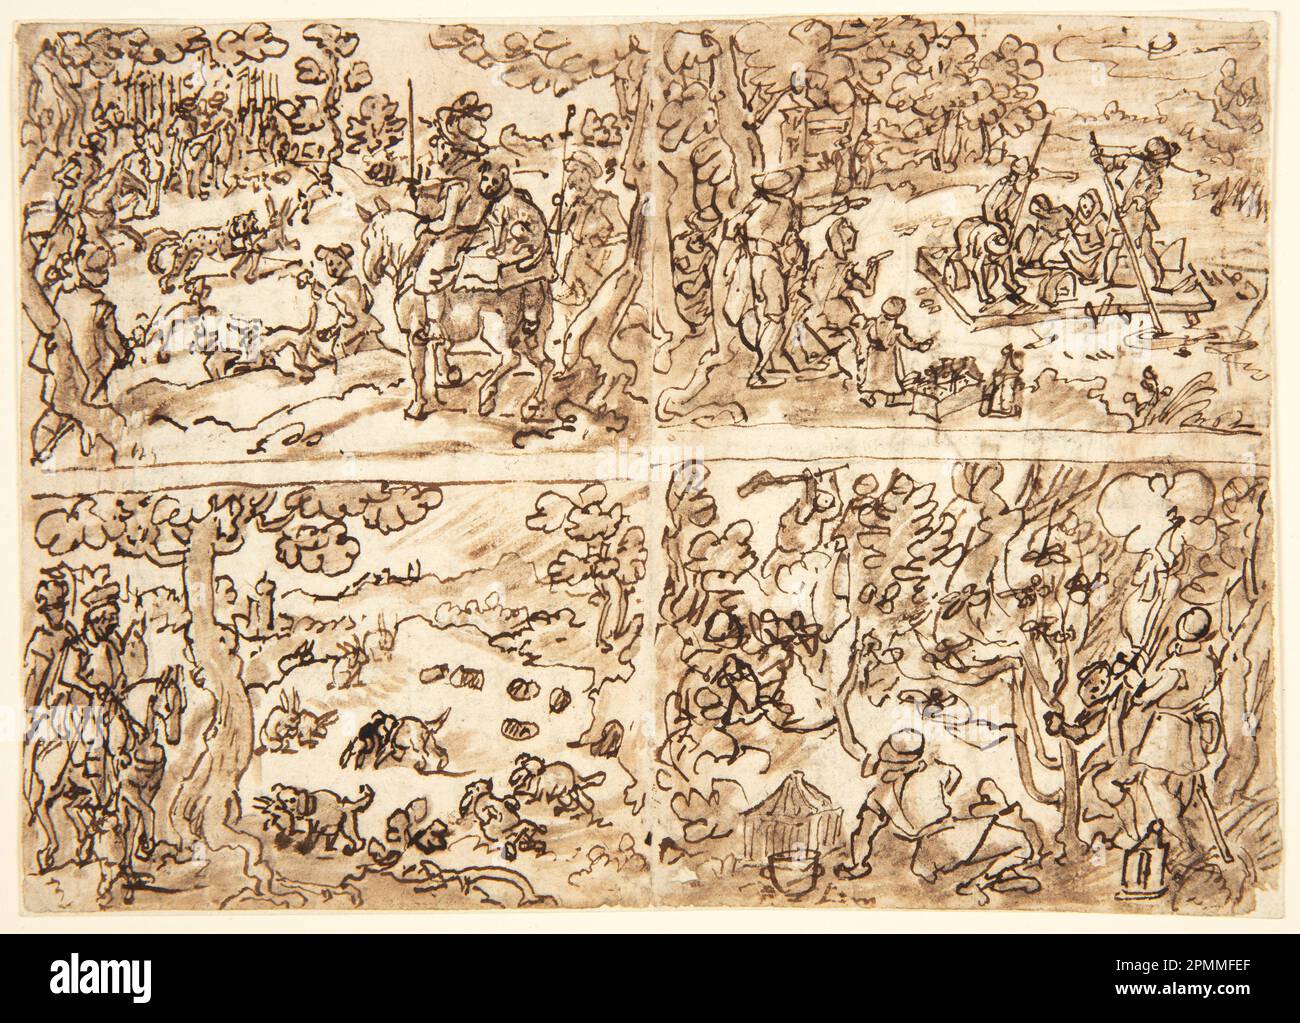 Drawing, Rabbit Hunt [above left]; Fishing by Night [above right]; The Catching of Nightowls [recto, below right]; King of England Hunting for Rabbits [below left]; Jan van der Straet, called Stradanus (Flemish, 1523–1605); Engraved by Hans Collaert II (Flemish, 1560 - 1628), Theodor Galle; Published by Philips Galle (Flemish, 1537 - 1612); Collaborator: Luigi Alamanni (Italian, 1558–1603); Subject: Conrad Gessner (Swiss, 1516 – 1565), Pietro de' Crescenzi (Italian, ca. 1230 – 1320); Netherlands; pen and ink, brush and brown wash over black chalk on laid paper Stock Photo